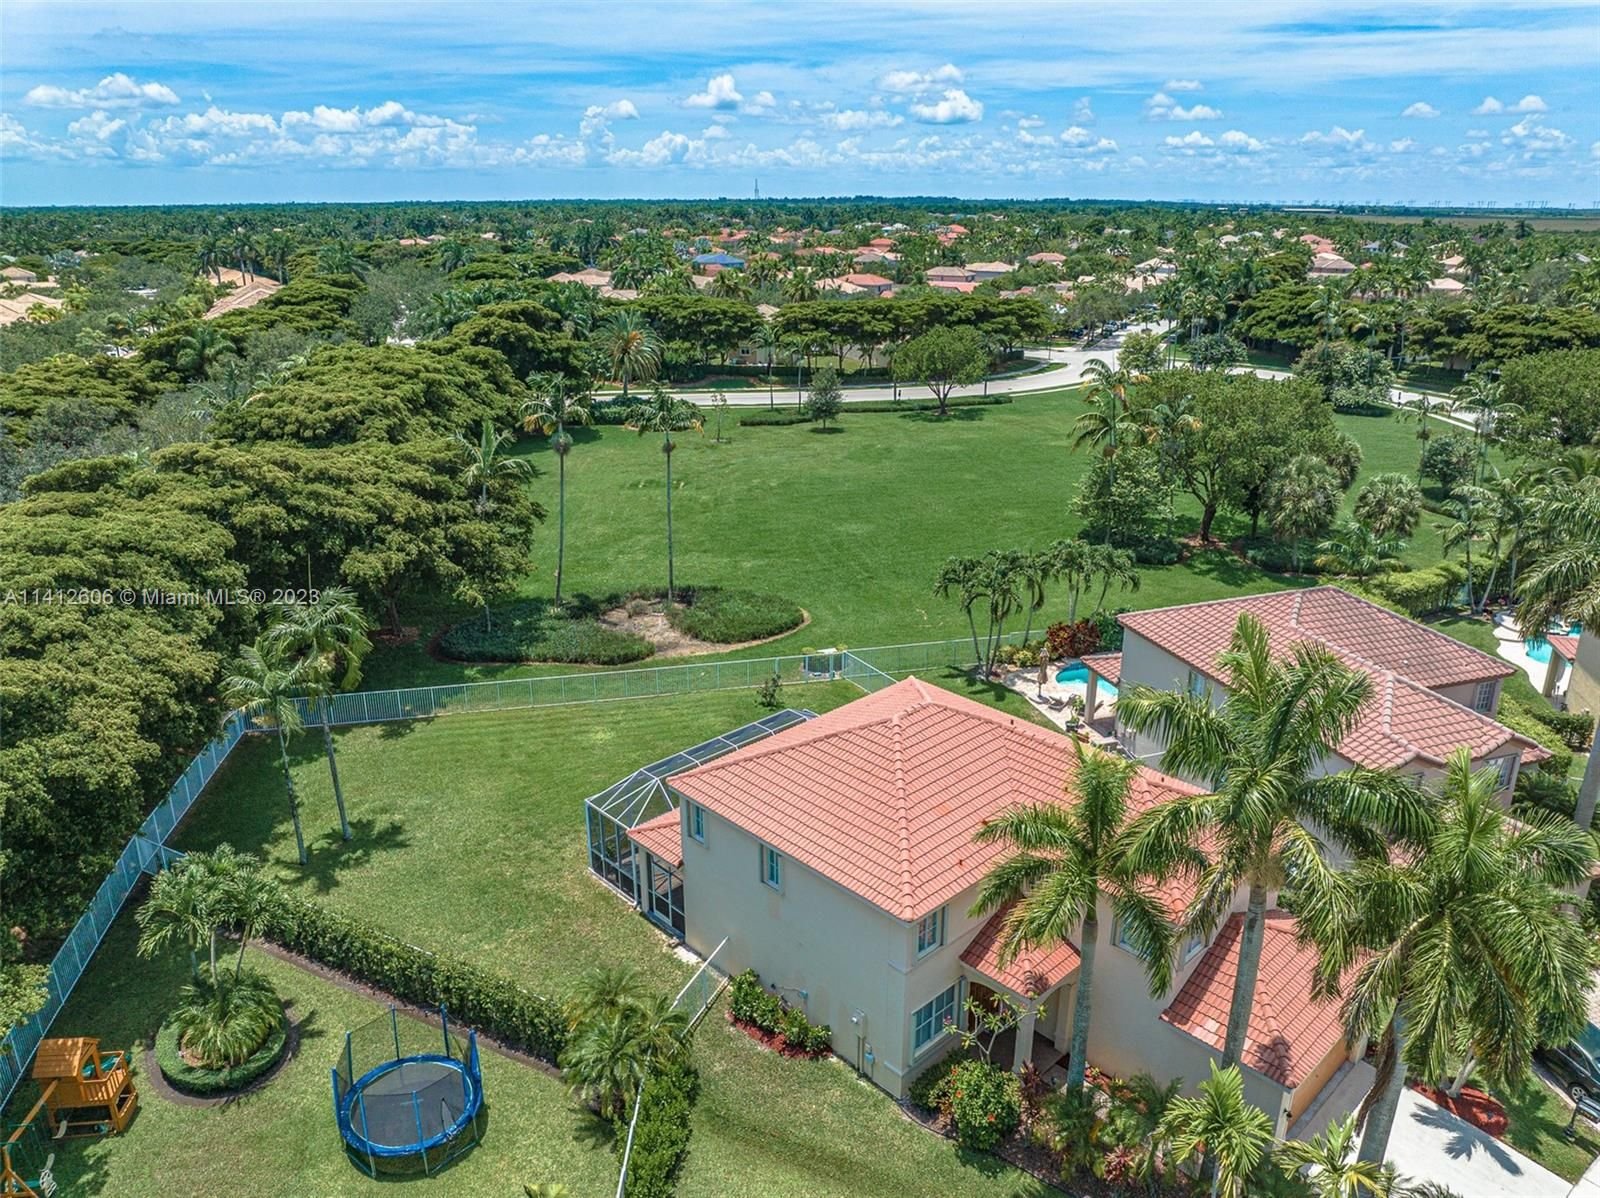 Real estate property located at 1761 Winterberry Ln, Broward County, Weston, FL